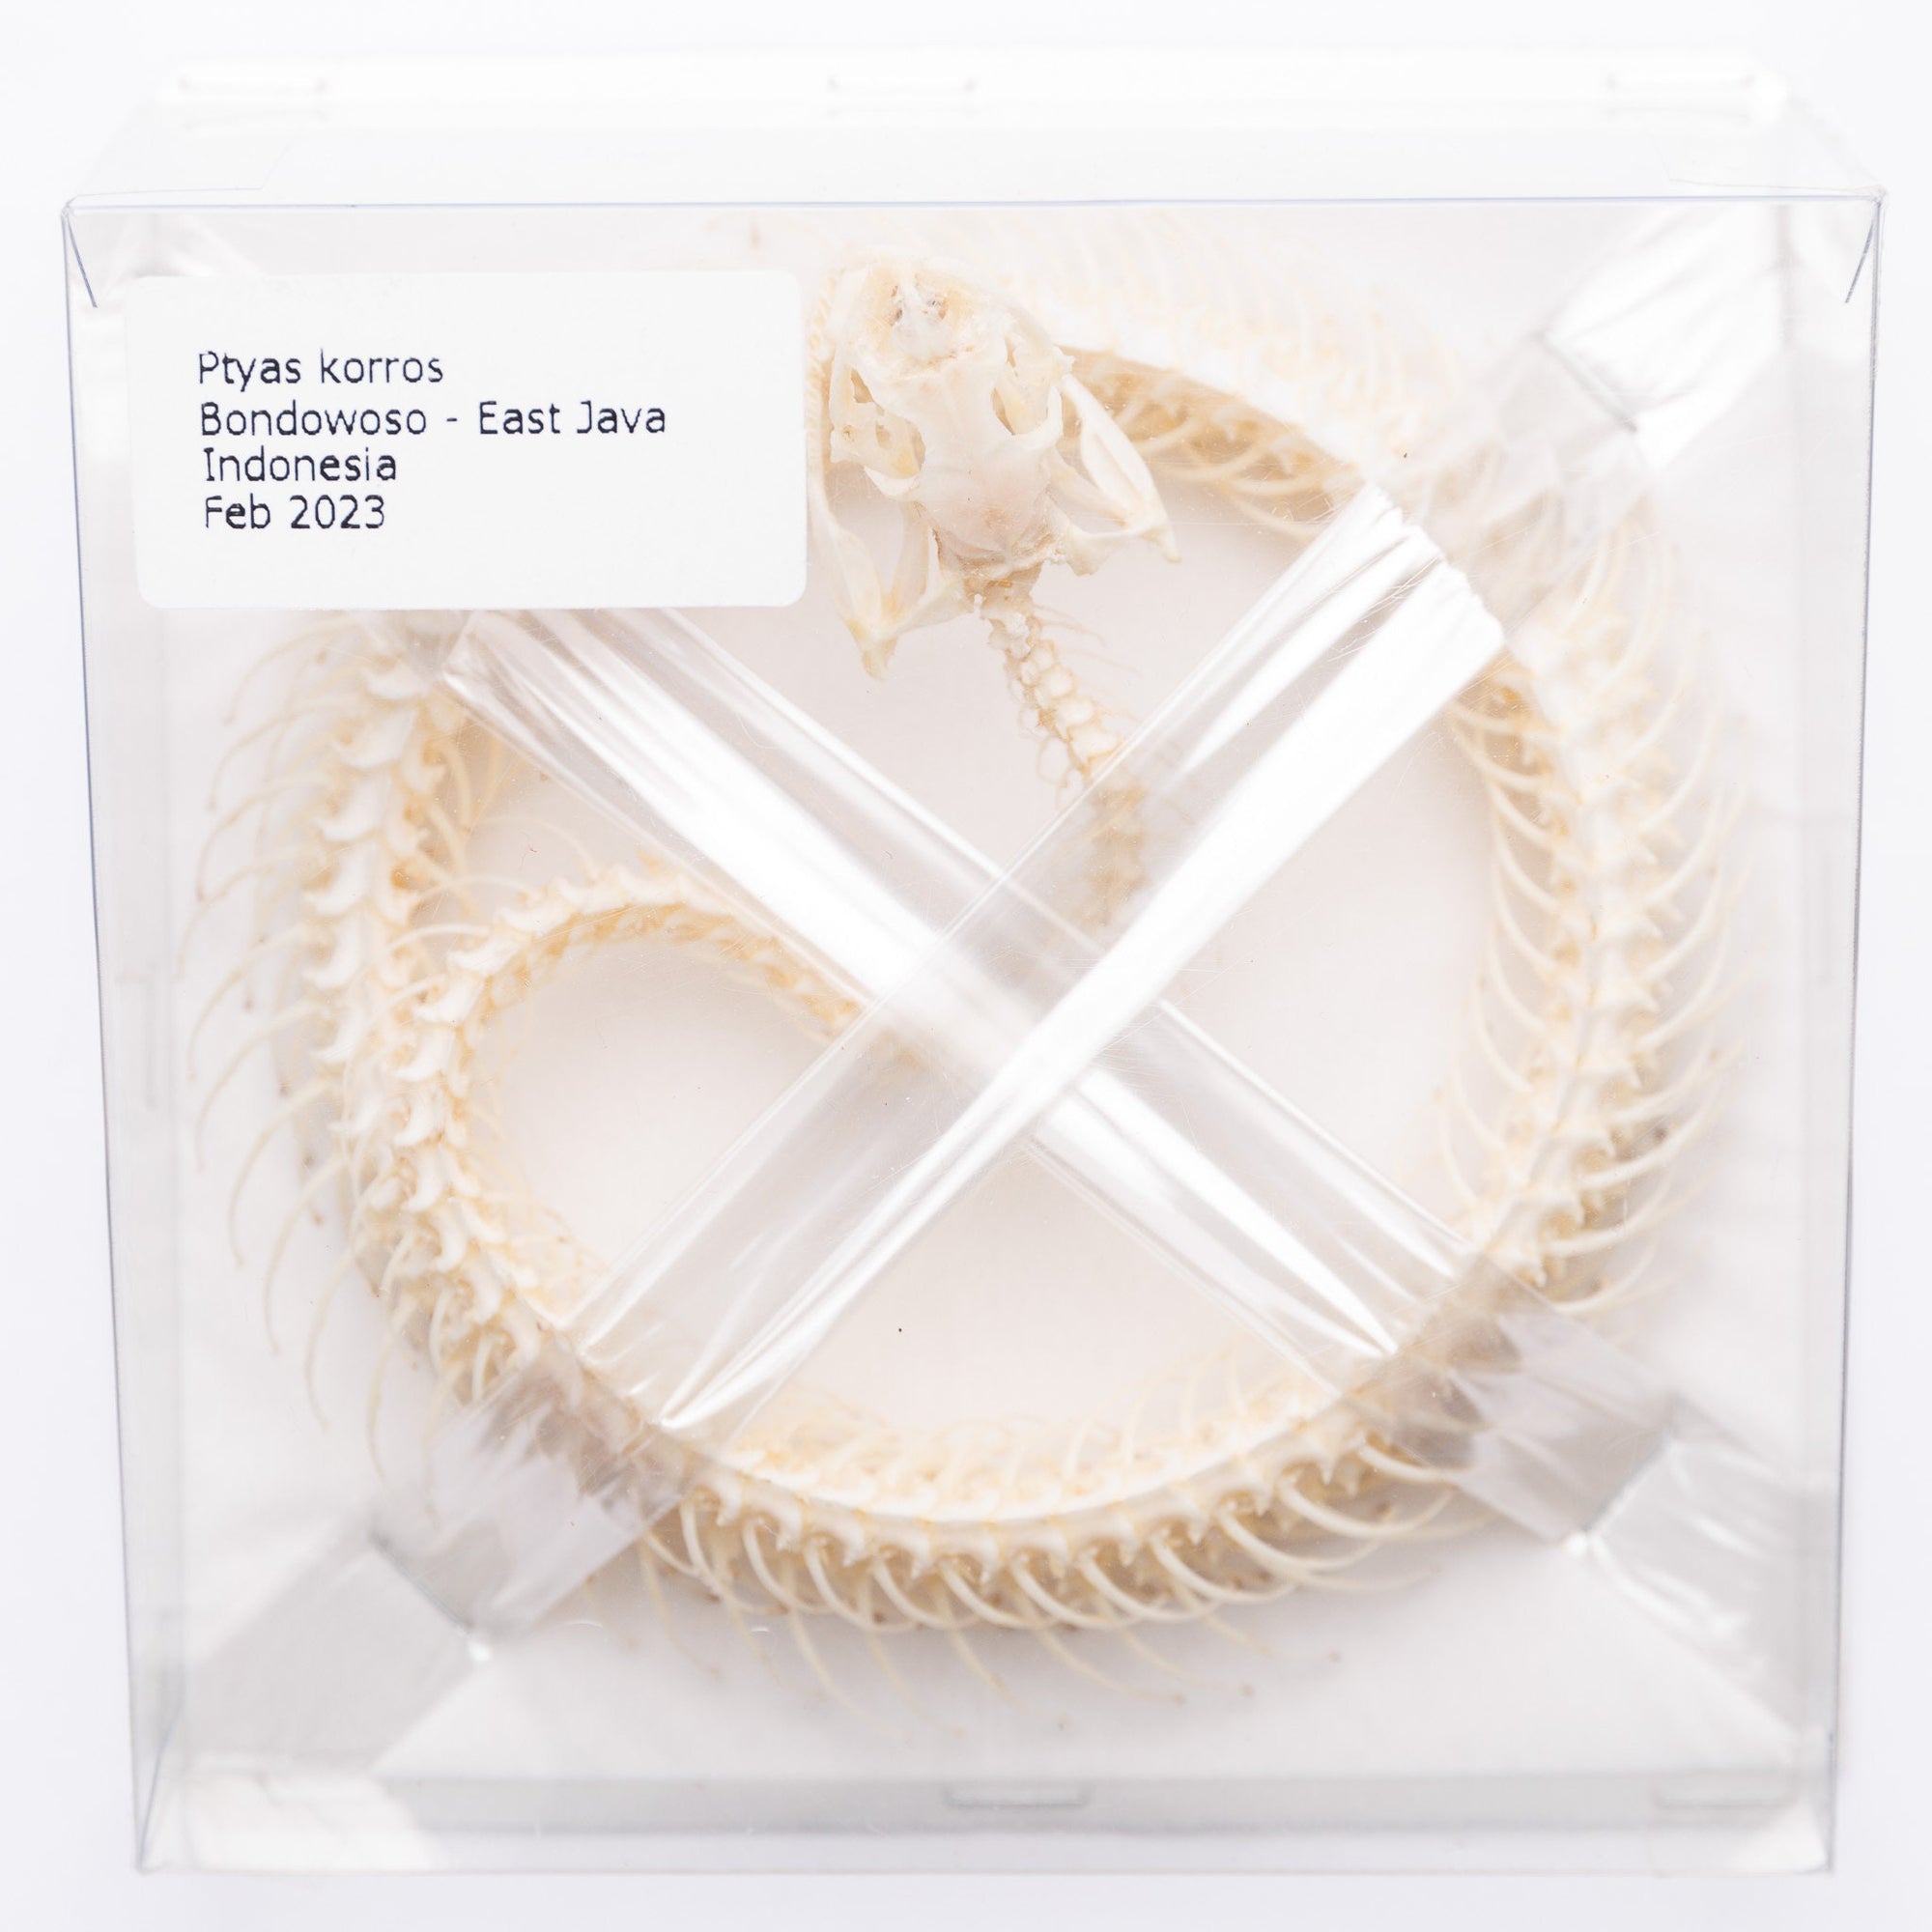 Indo-Chinese Rat Snake Skeleton (Ptyas korros) | A1 Coiled Specimen for Framing, Collecting, Study